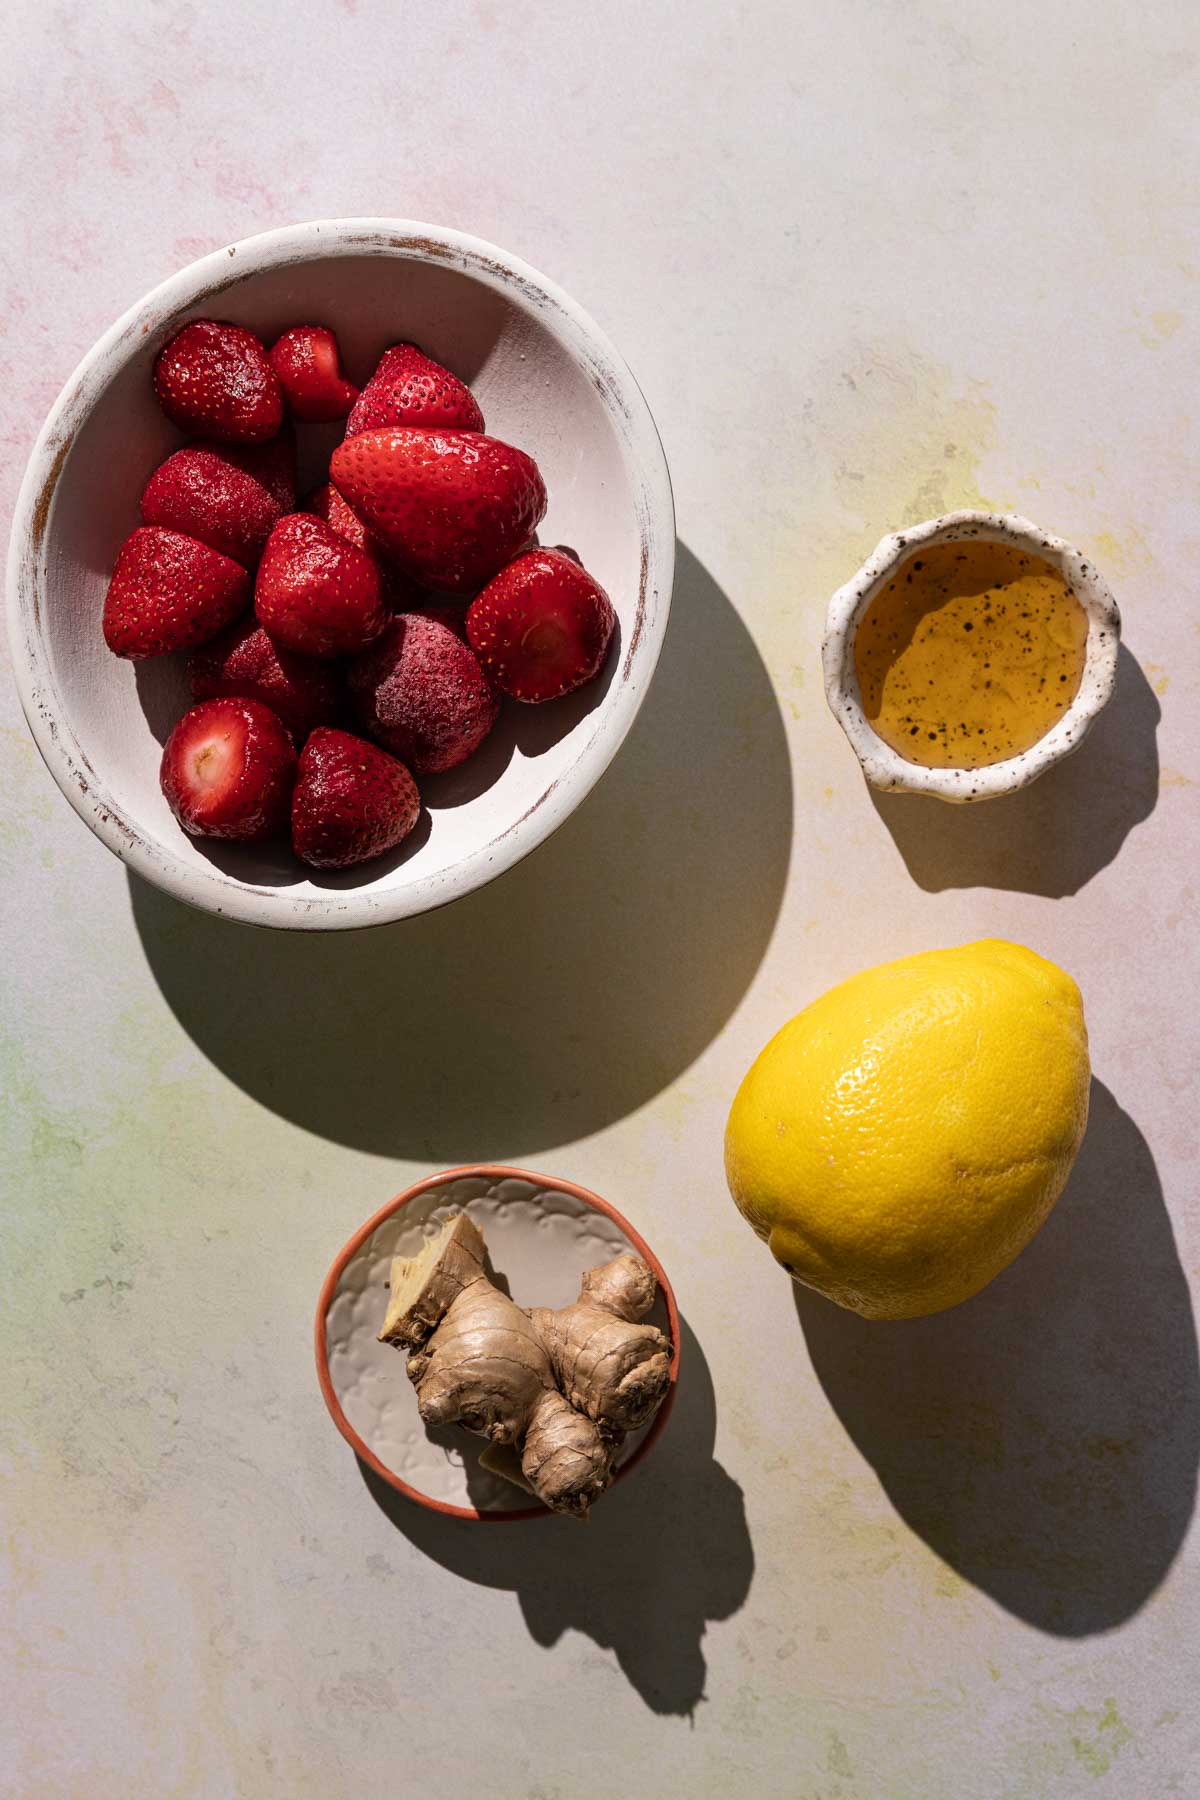 Ingredients for Strawberry Lemonade smoothie in bowls on a colorful background